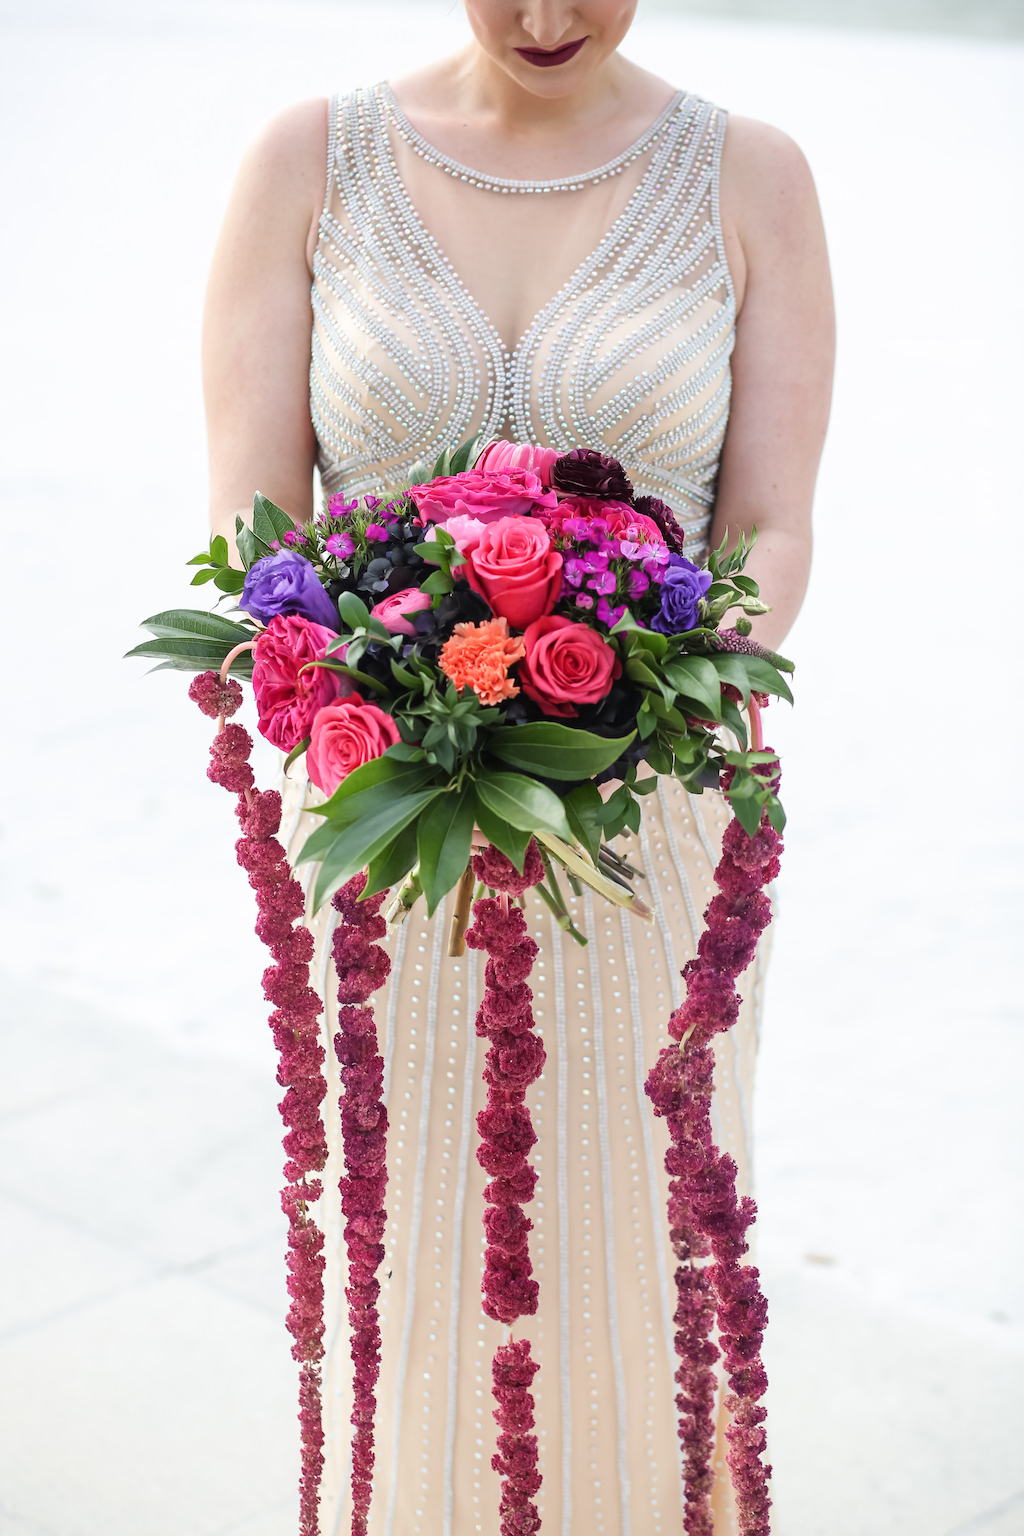 Outdoor Bridal Portrait in Beaded Ivory Illusion Wedding Dress with Pink Rose, Purple Floral, Fuchsia Cascade Flowers with Greenery Bouquet | Tampa Bay Wedding Boutique Truly Forever Bridal | Rentals and Florist Gabro Event Services | Photographer Lifelong Studios Photography